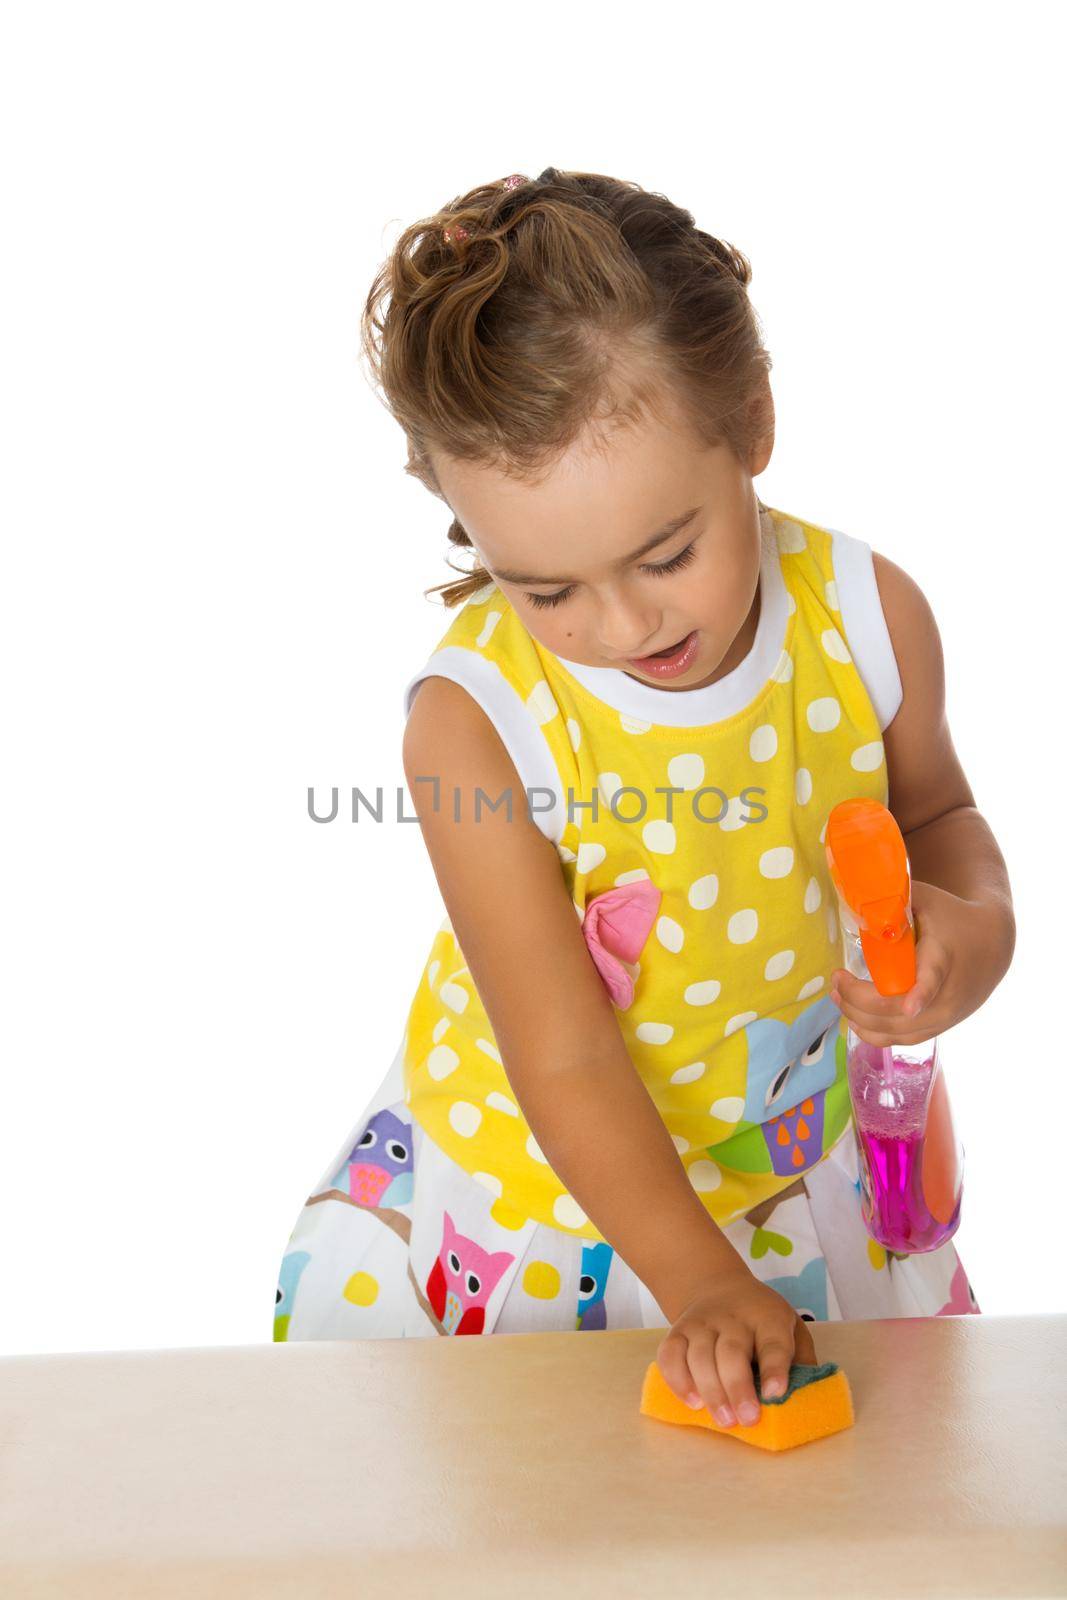 Diligent little girl puts things in order on the table. Girl rubbing with a sponge or a gel to the surface of the table . Close-up - Isolated on white background